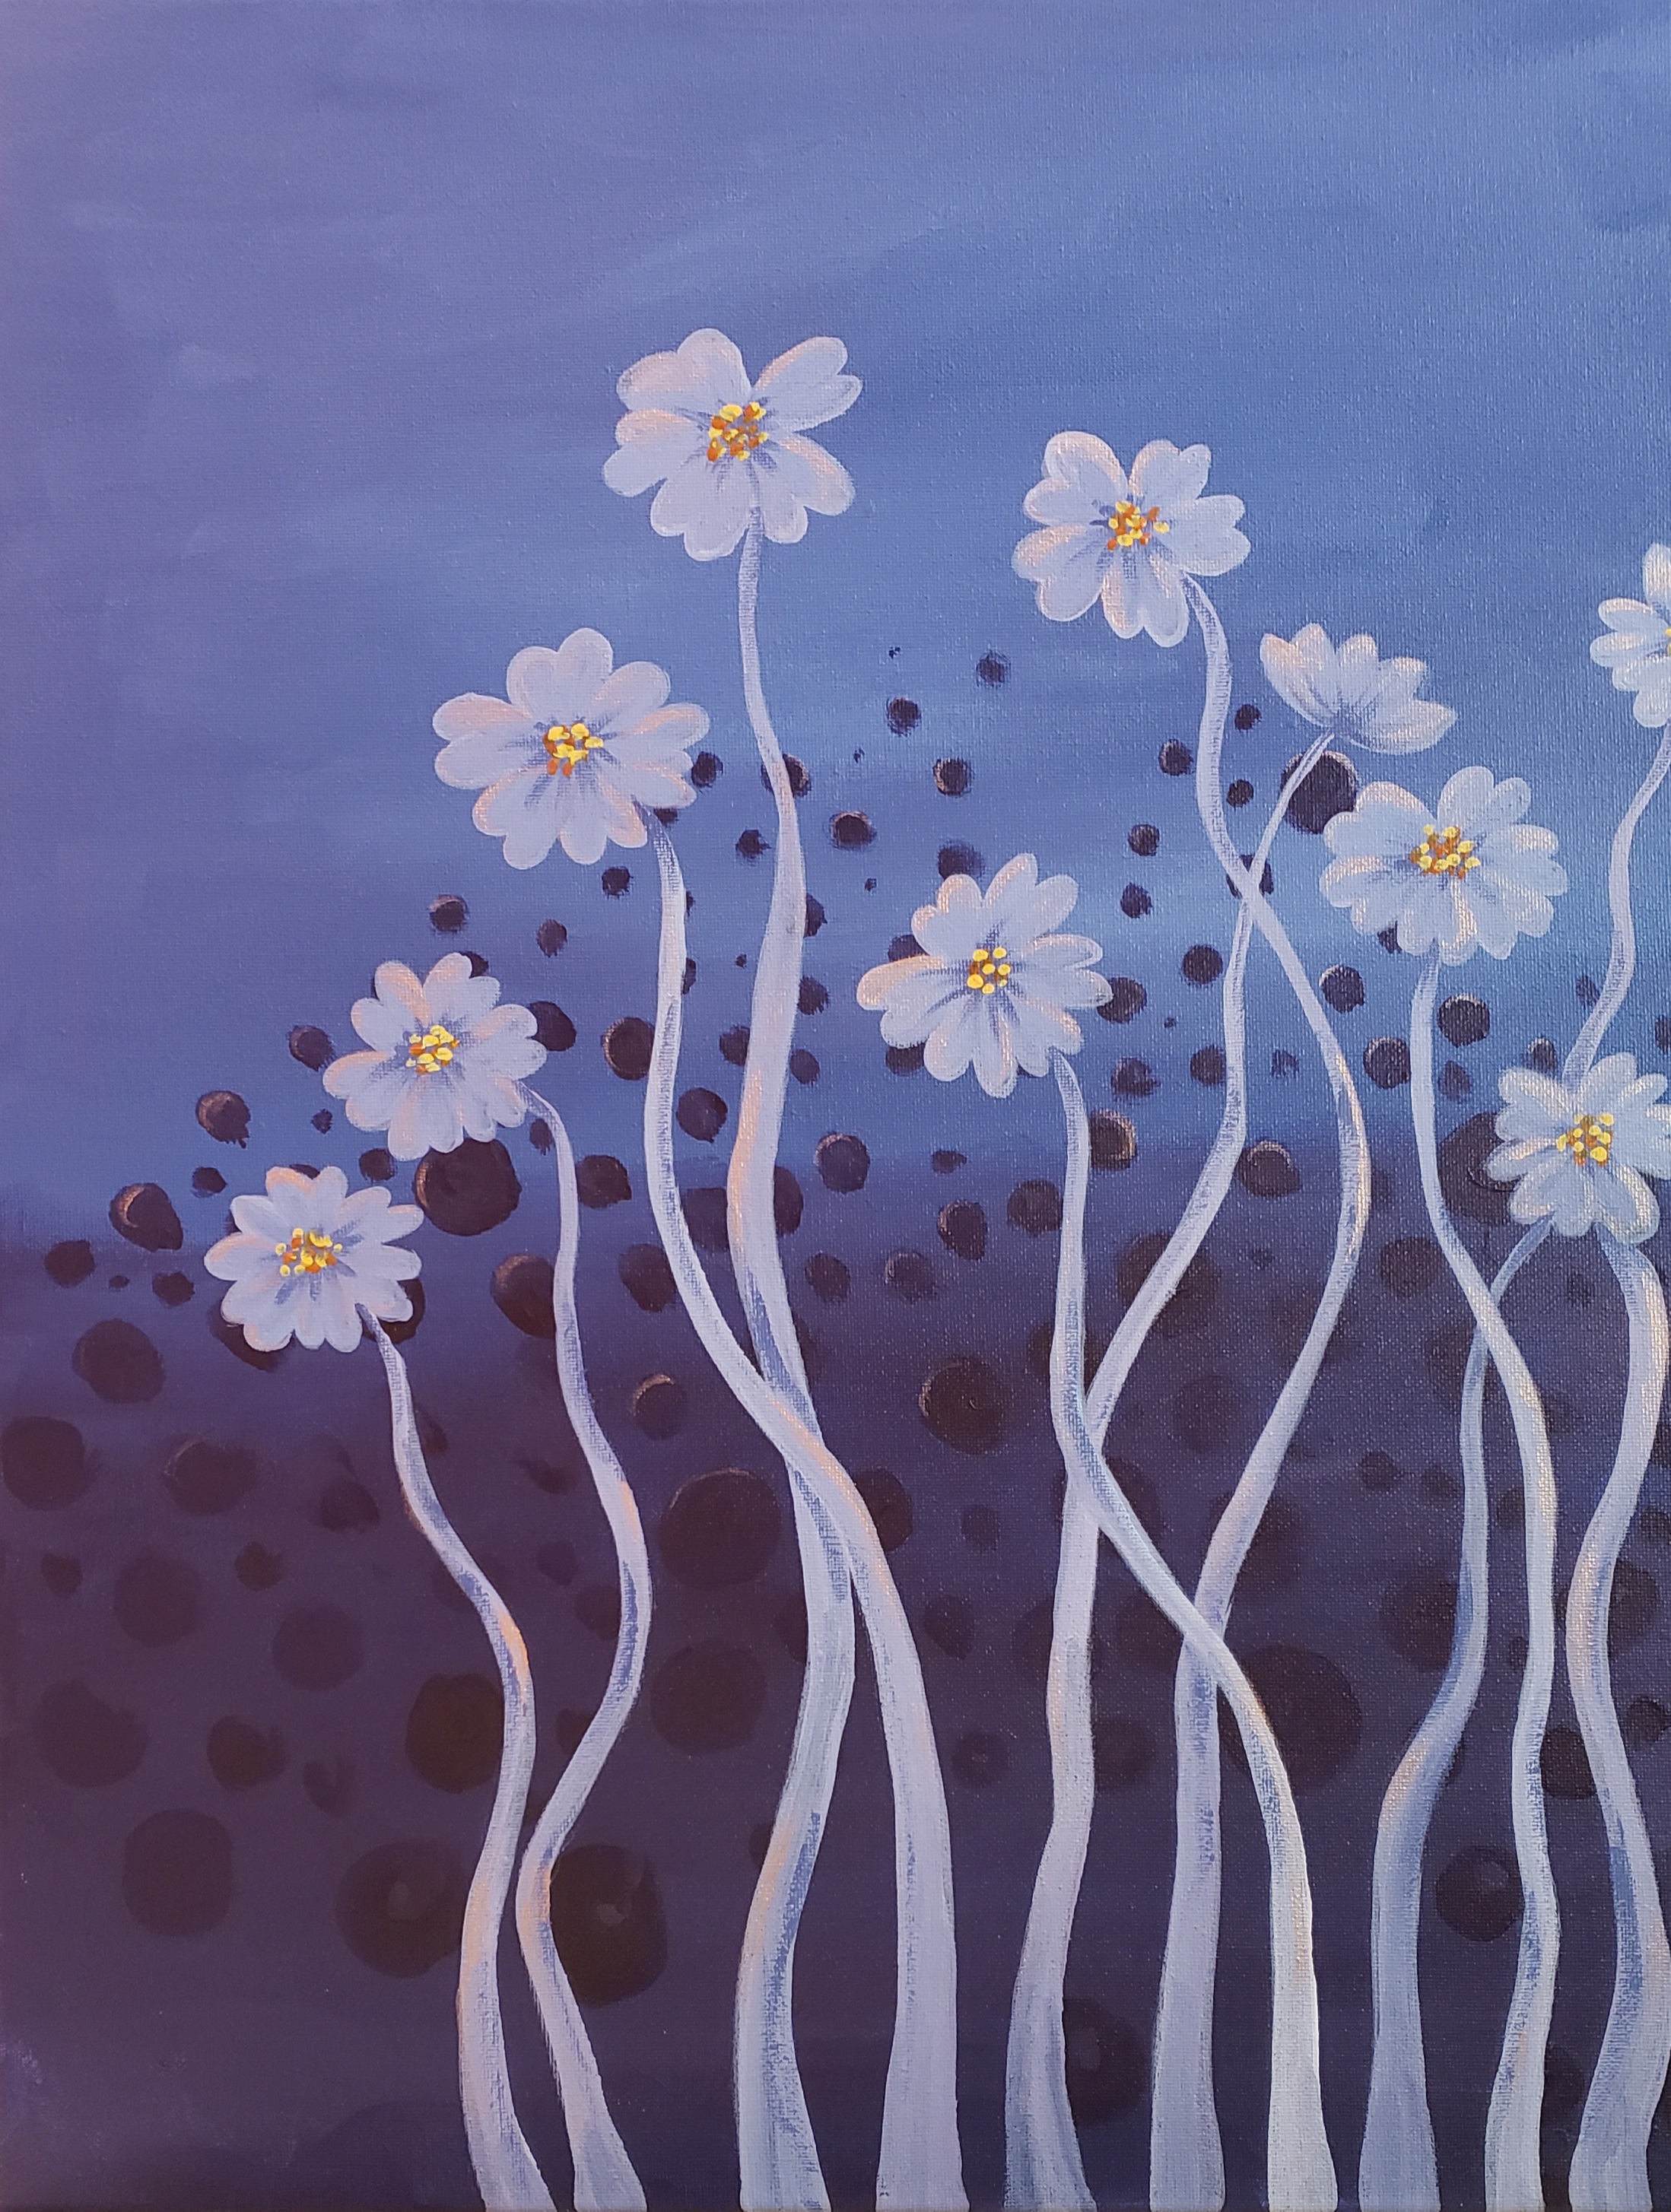 A Paint Nite The Glowing Flowers experience project by Yaymaker